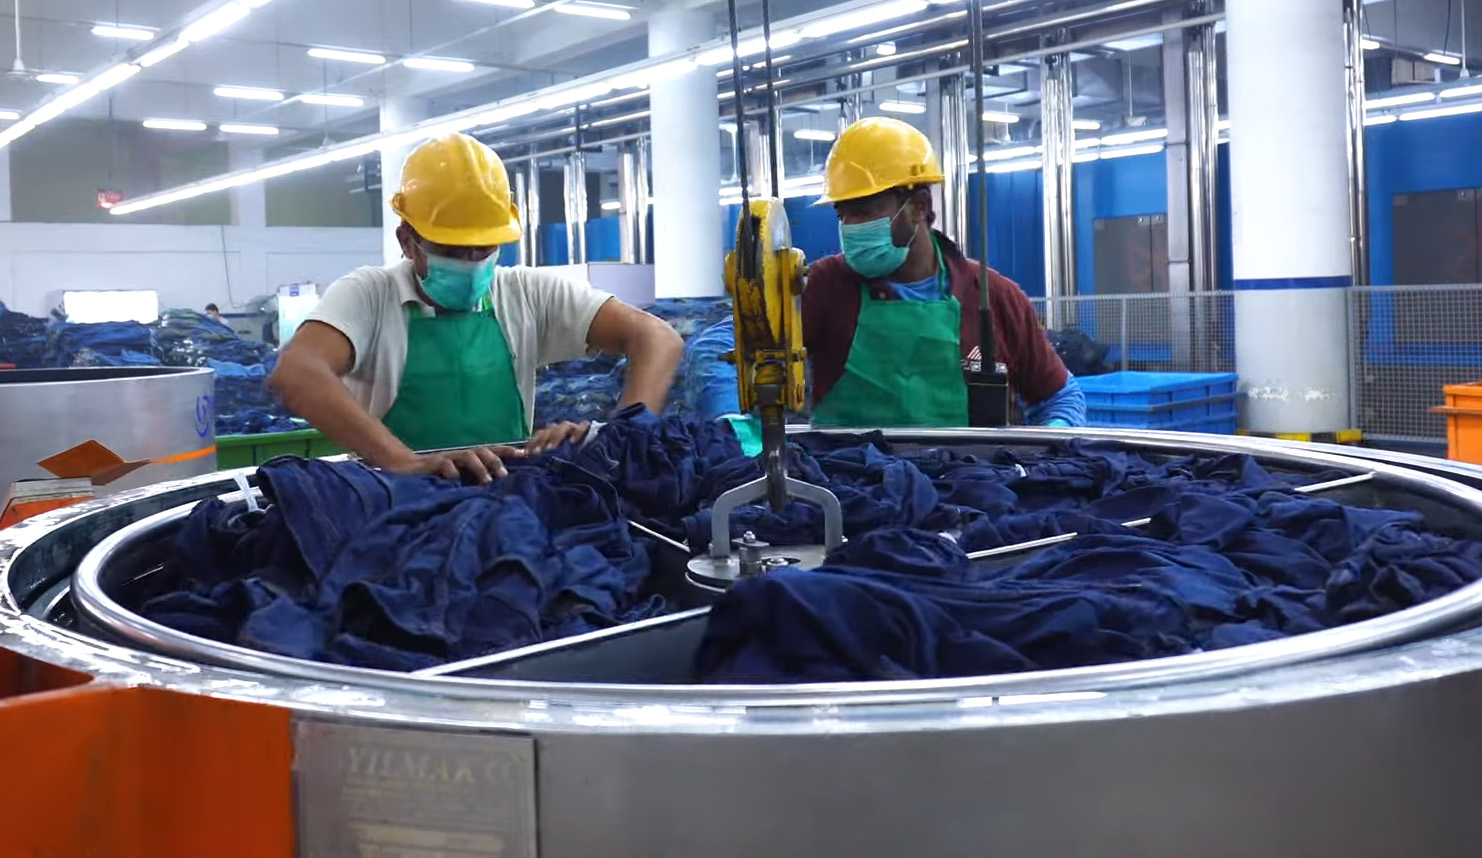 AGI Denim now recycles 4.4 million gallons of water each month as a result of its new wastewater treatment plant. © Monforts.